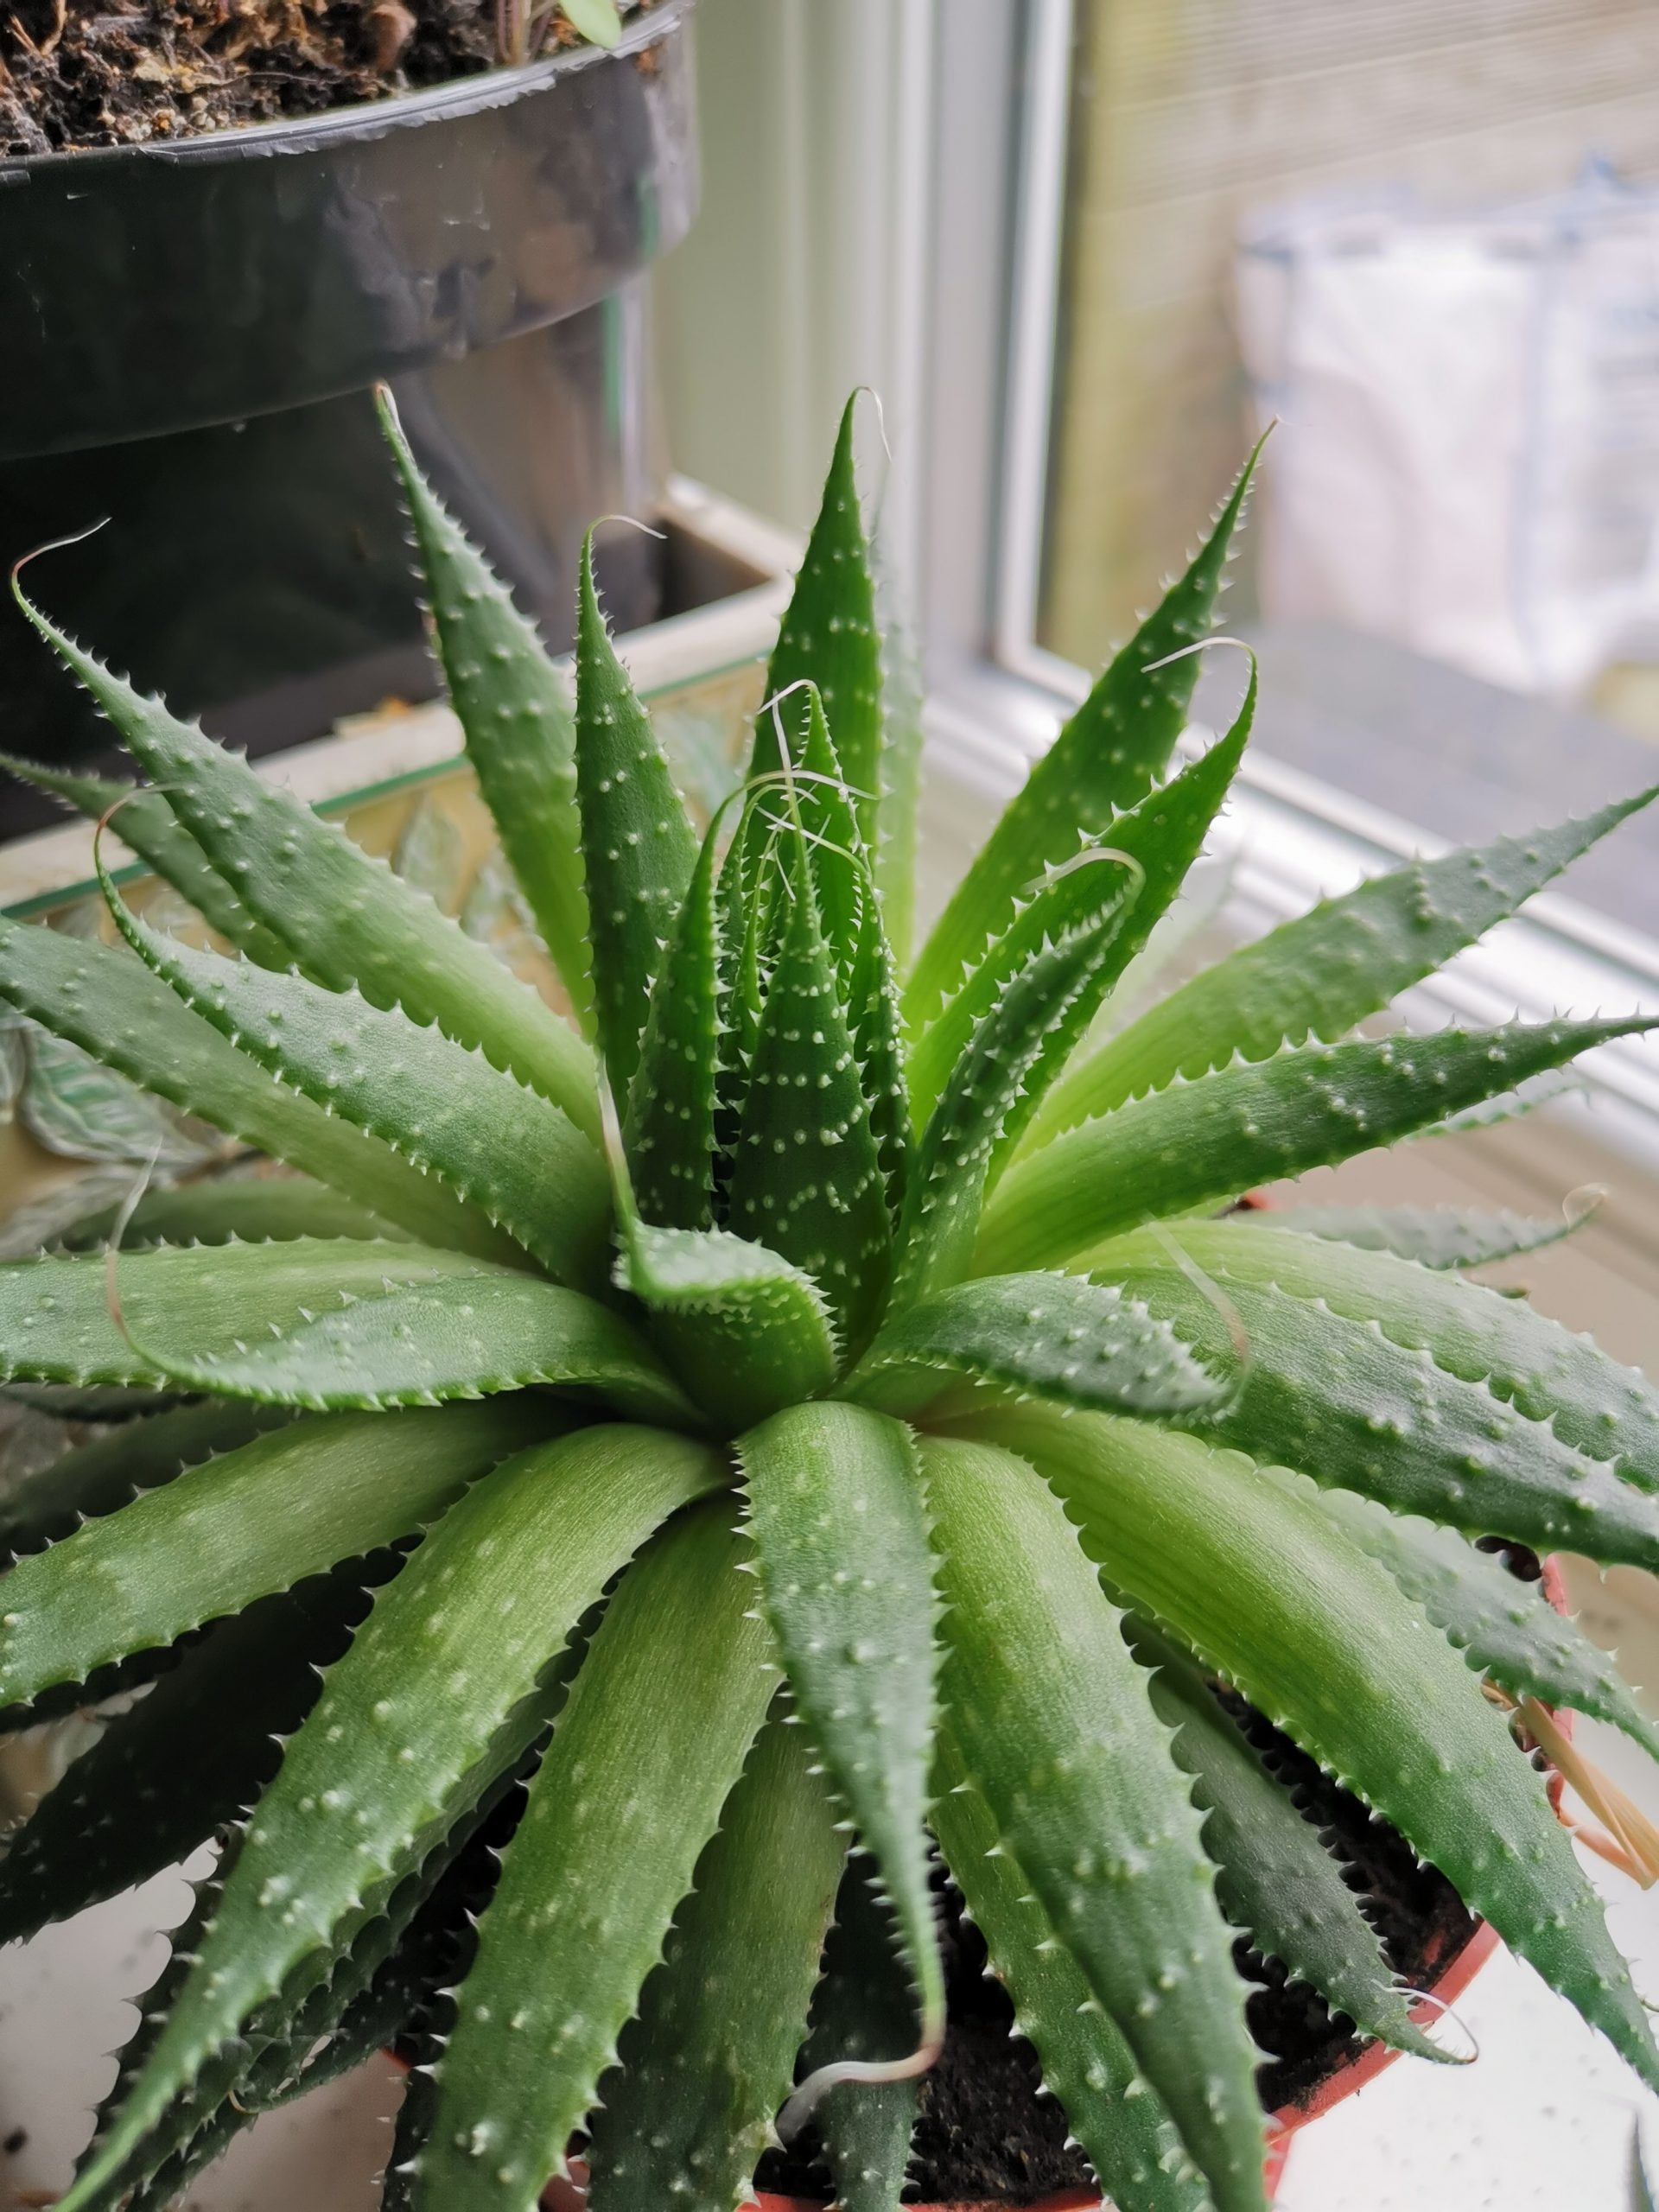 What Is The Difference Between Cactus And Aloe Vera?